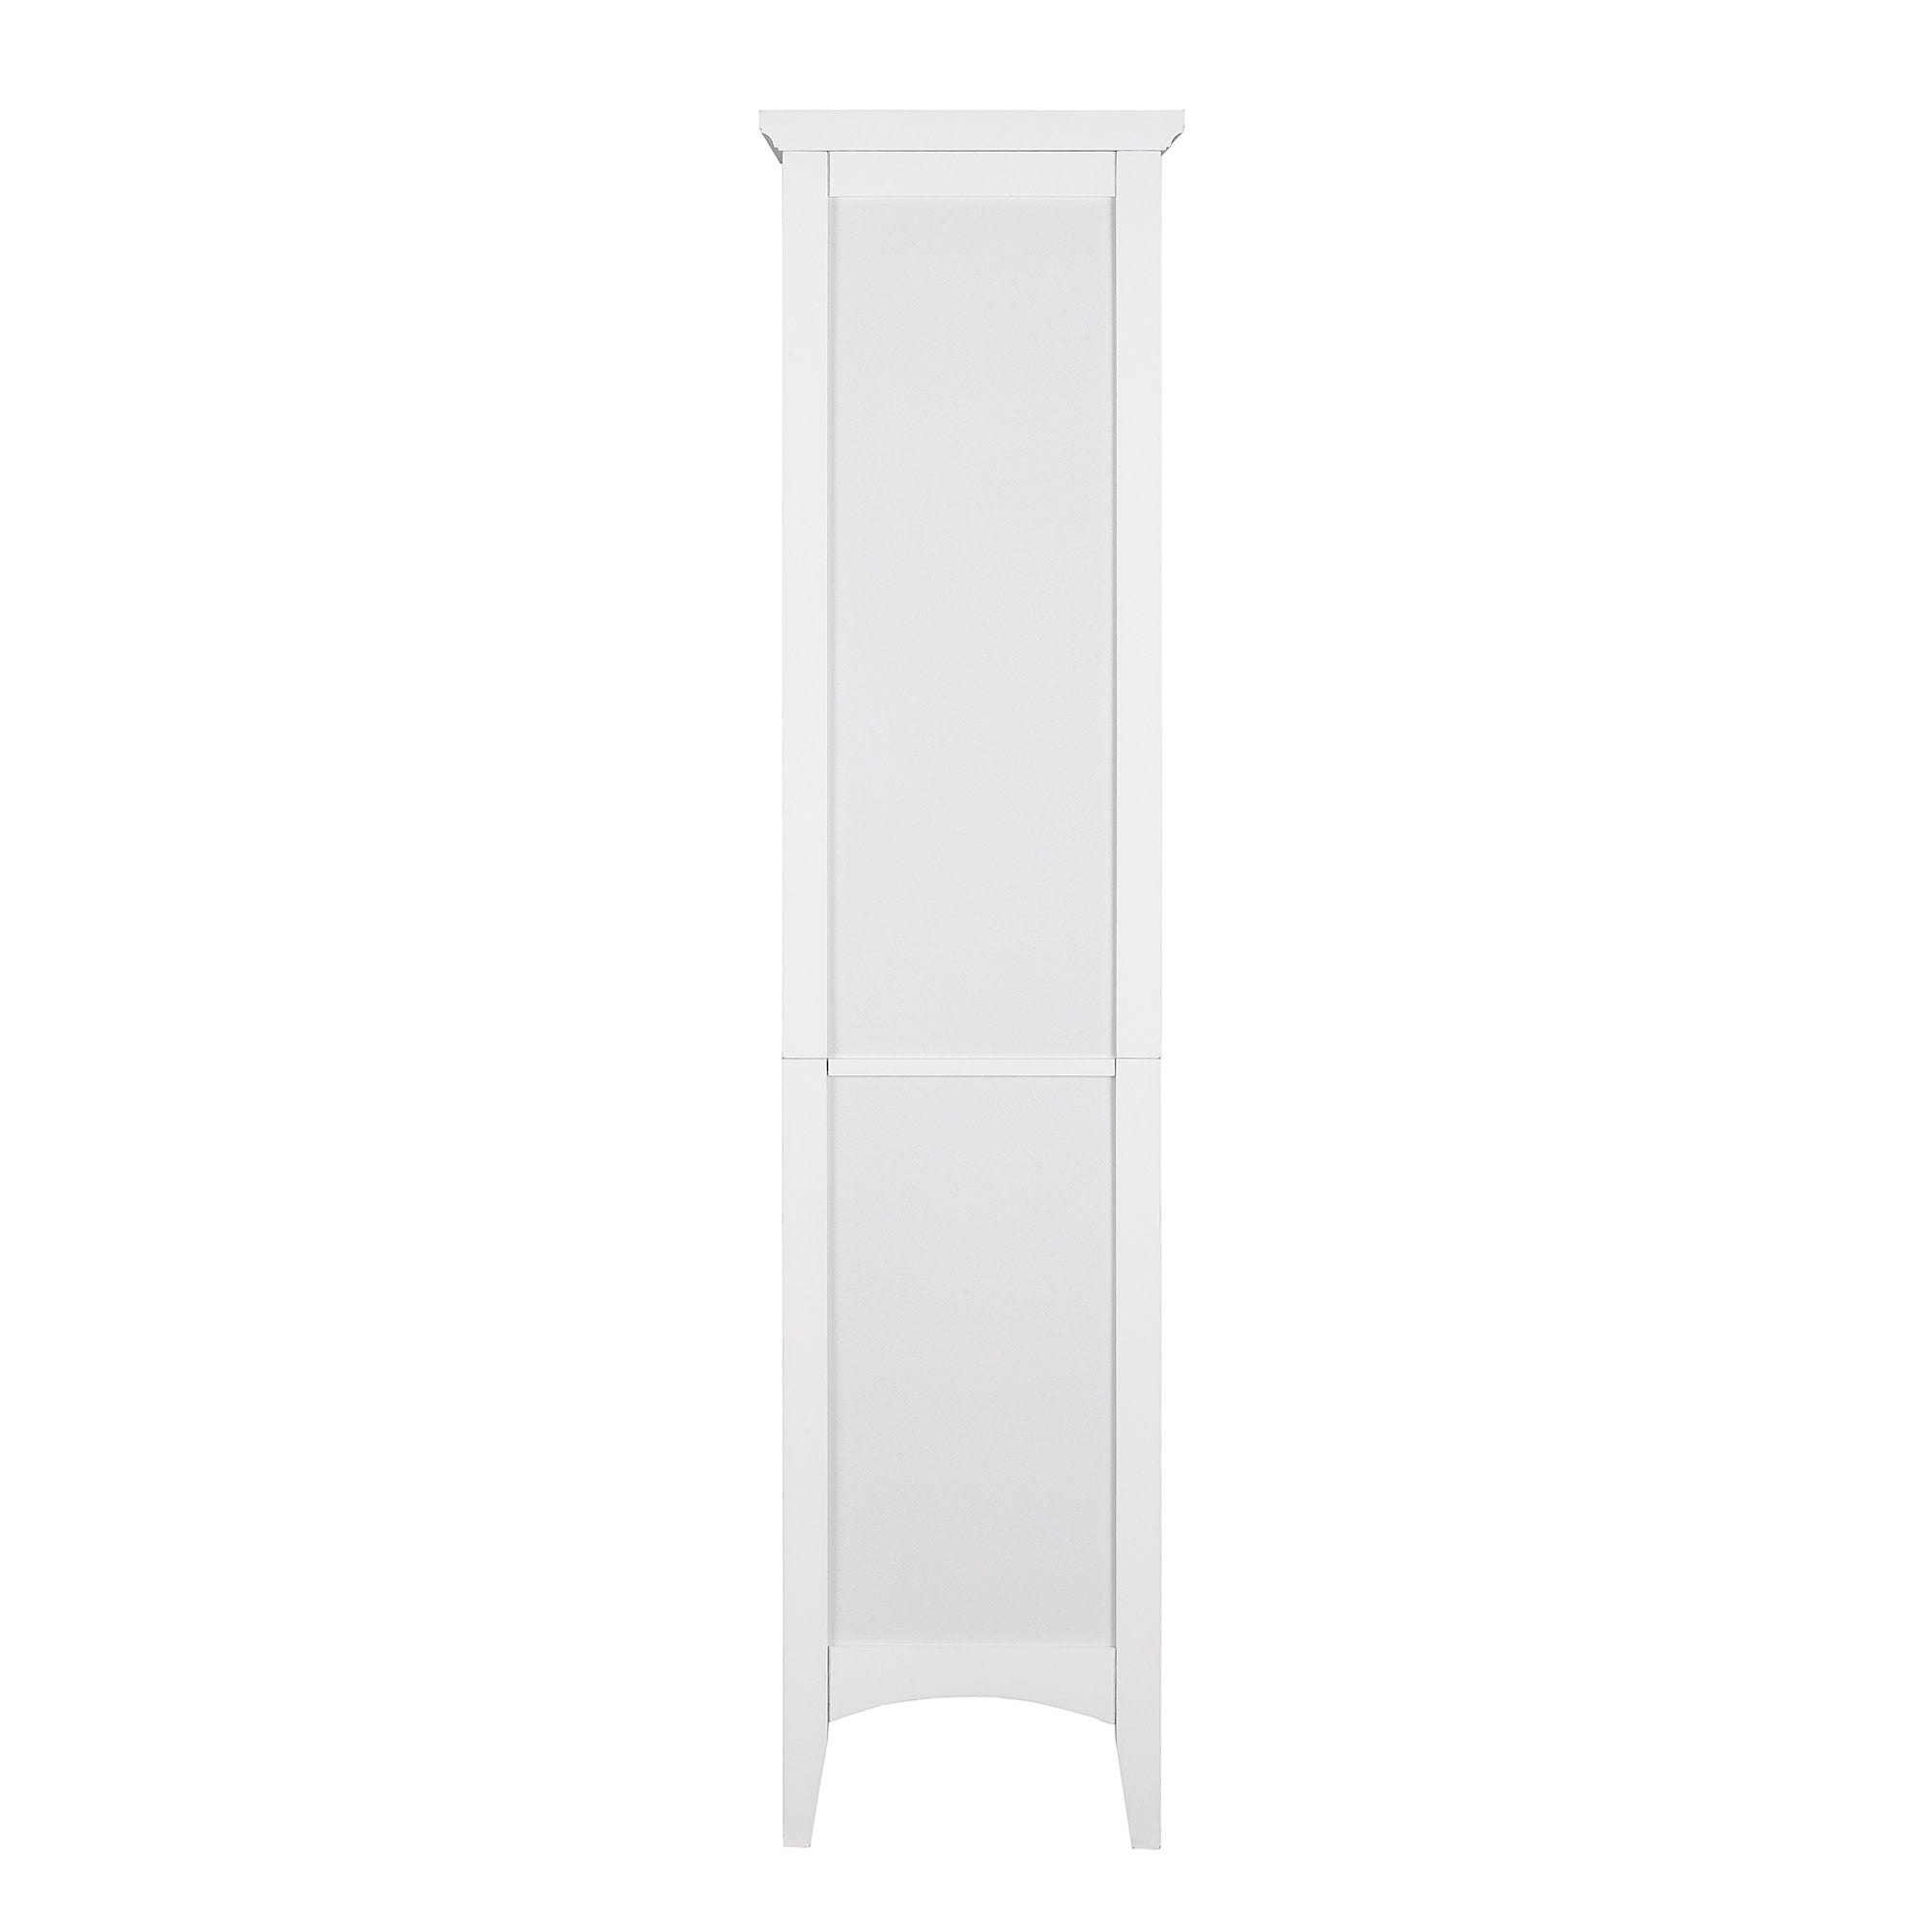 Teamson Home Glancy Wooden Tall Tower Cabinet with Storage, White